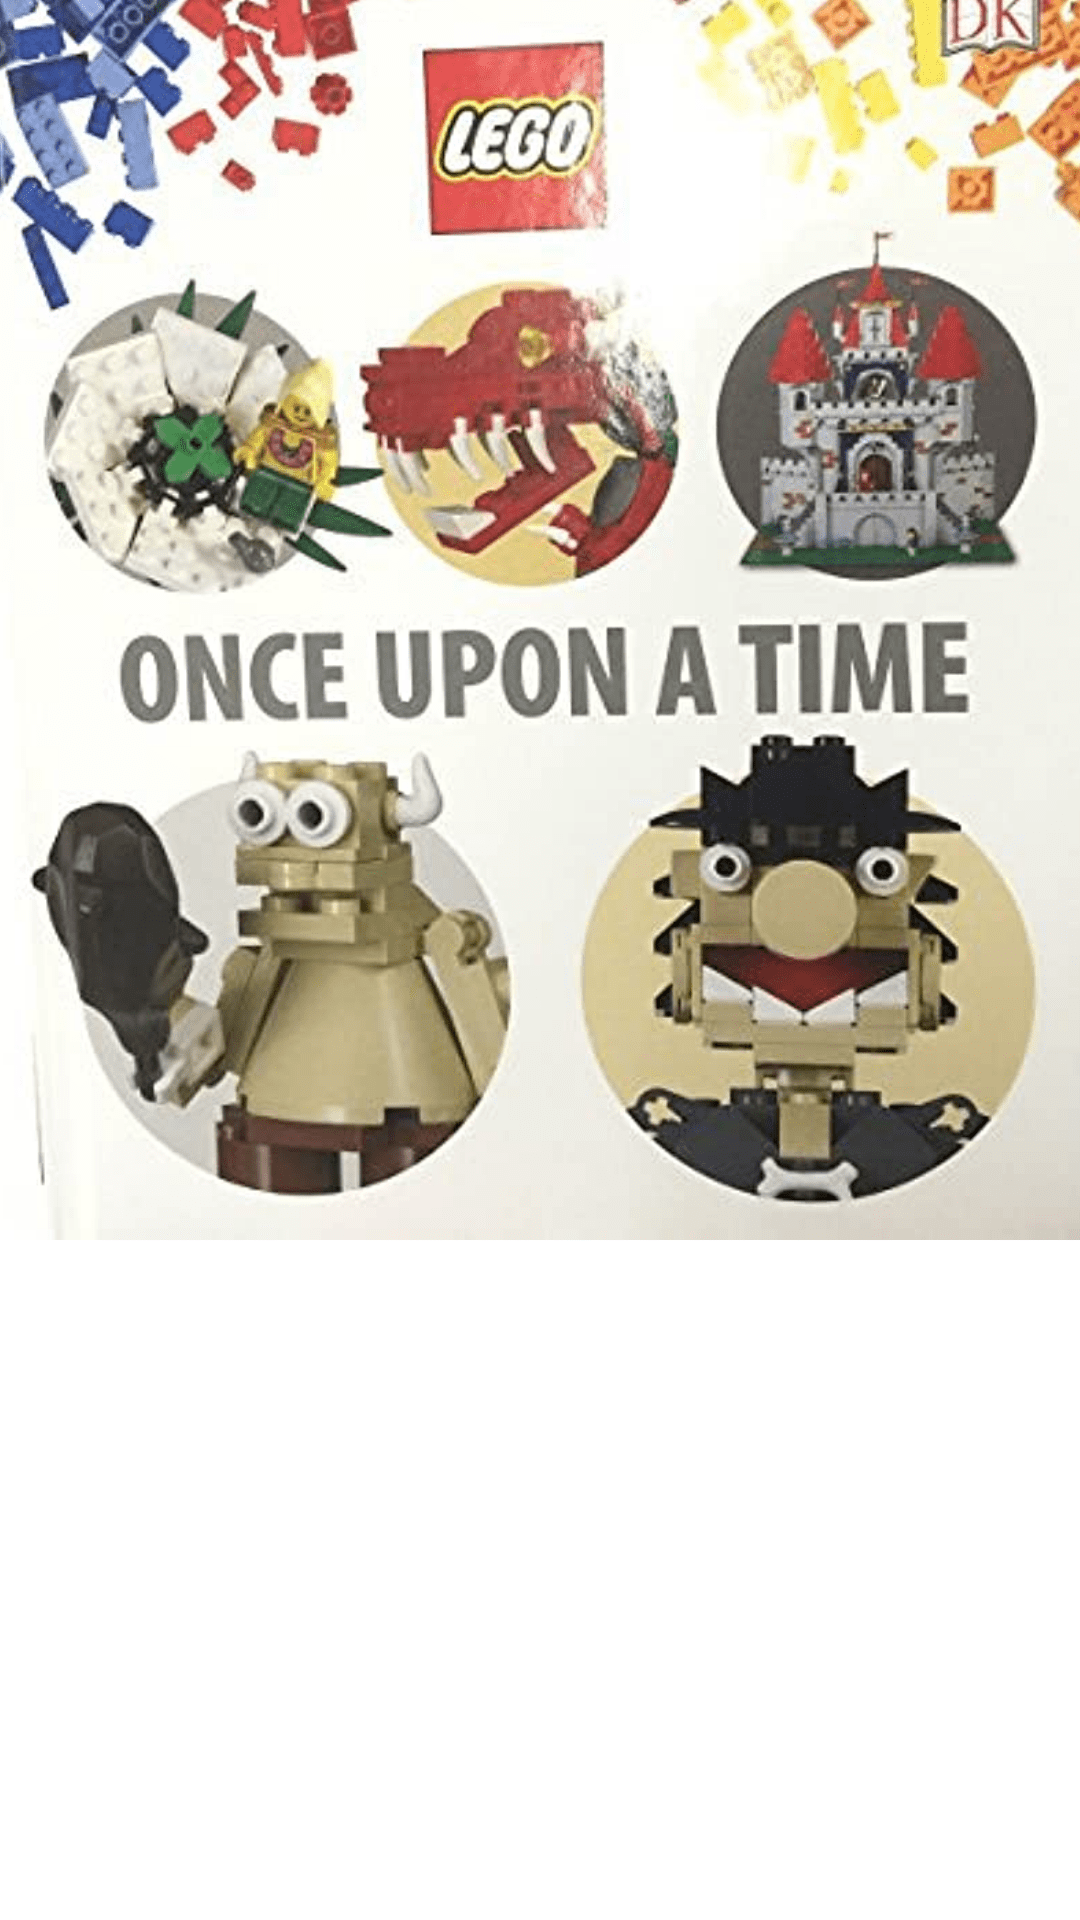 Lego: Once Upon a Time